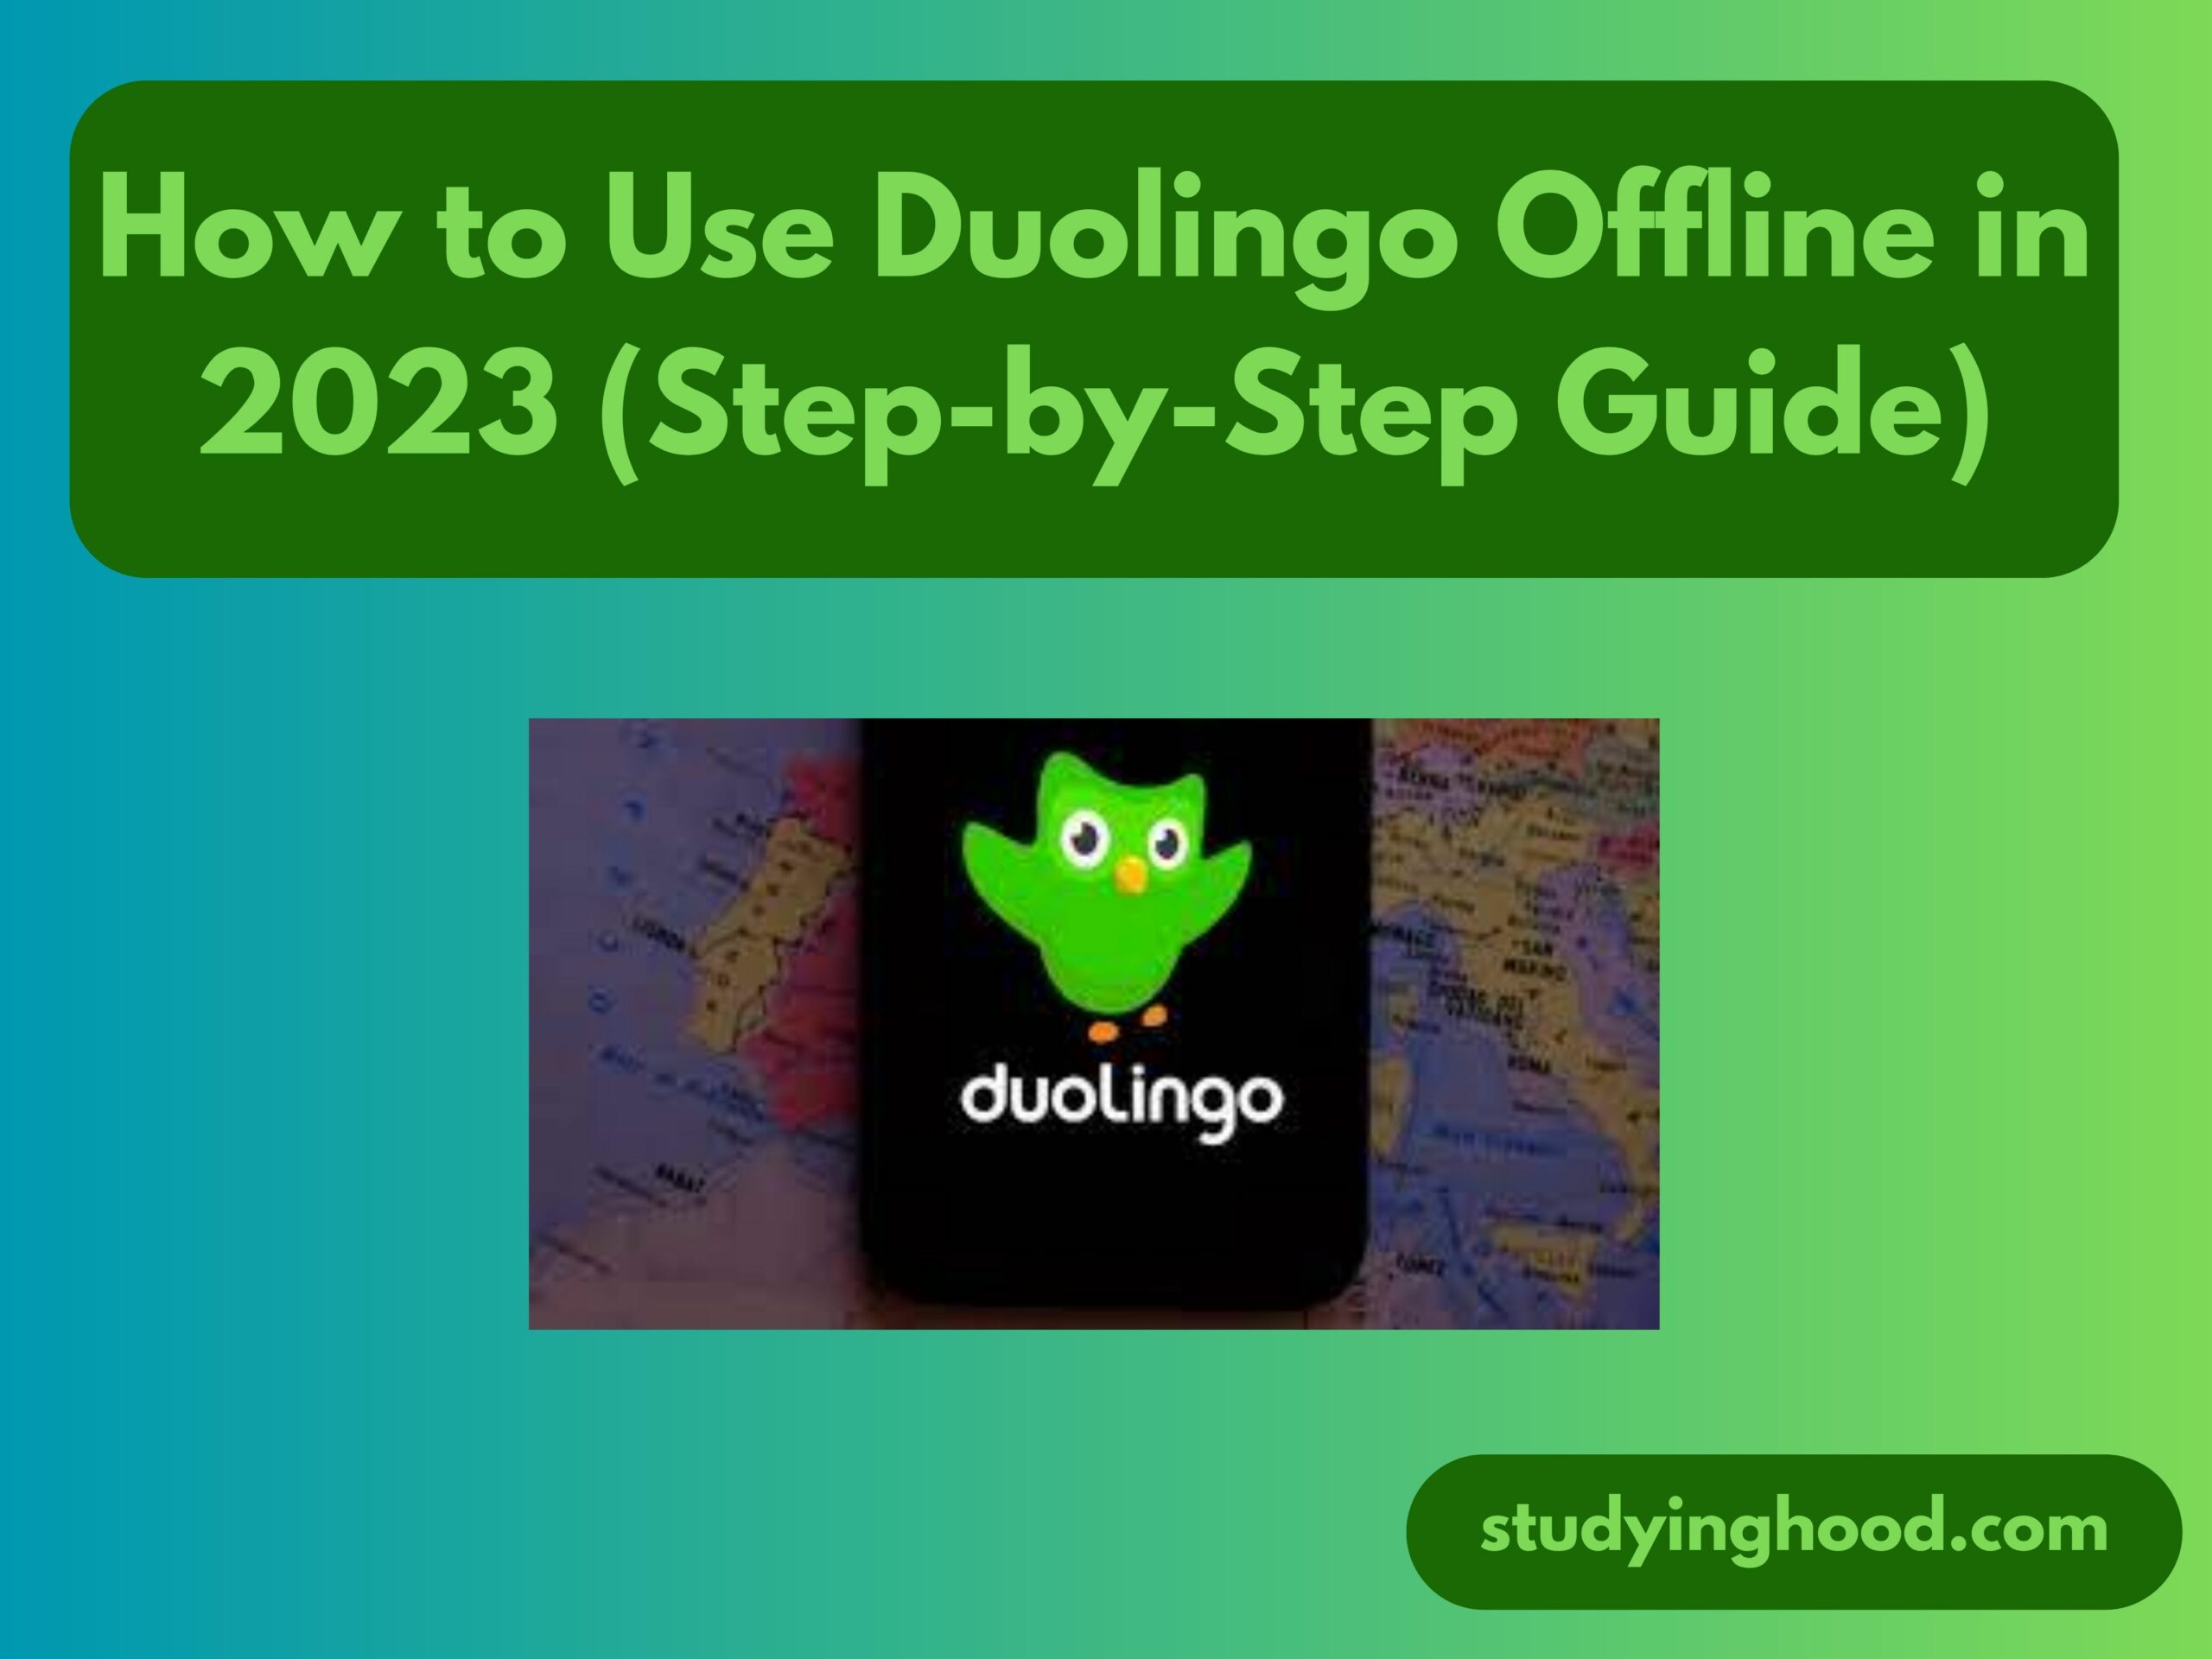 How to Use Duolingo Offline in 2023 (Step-by-Step Guide)